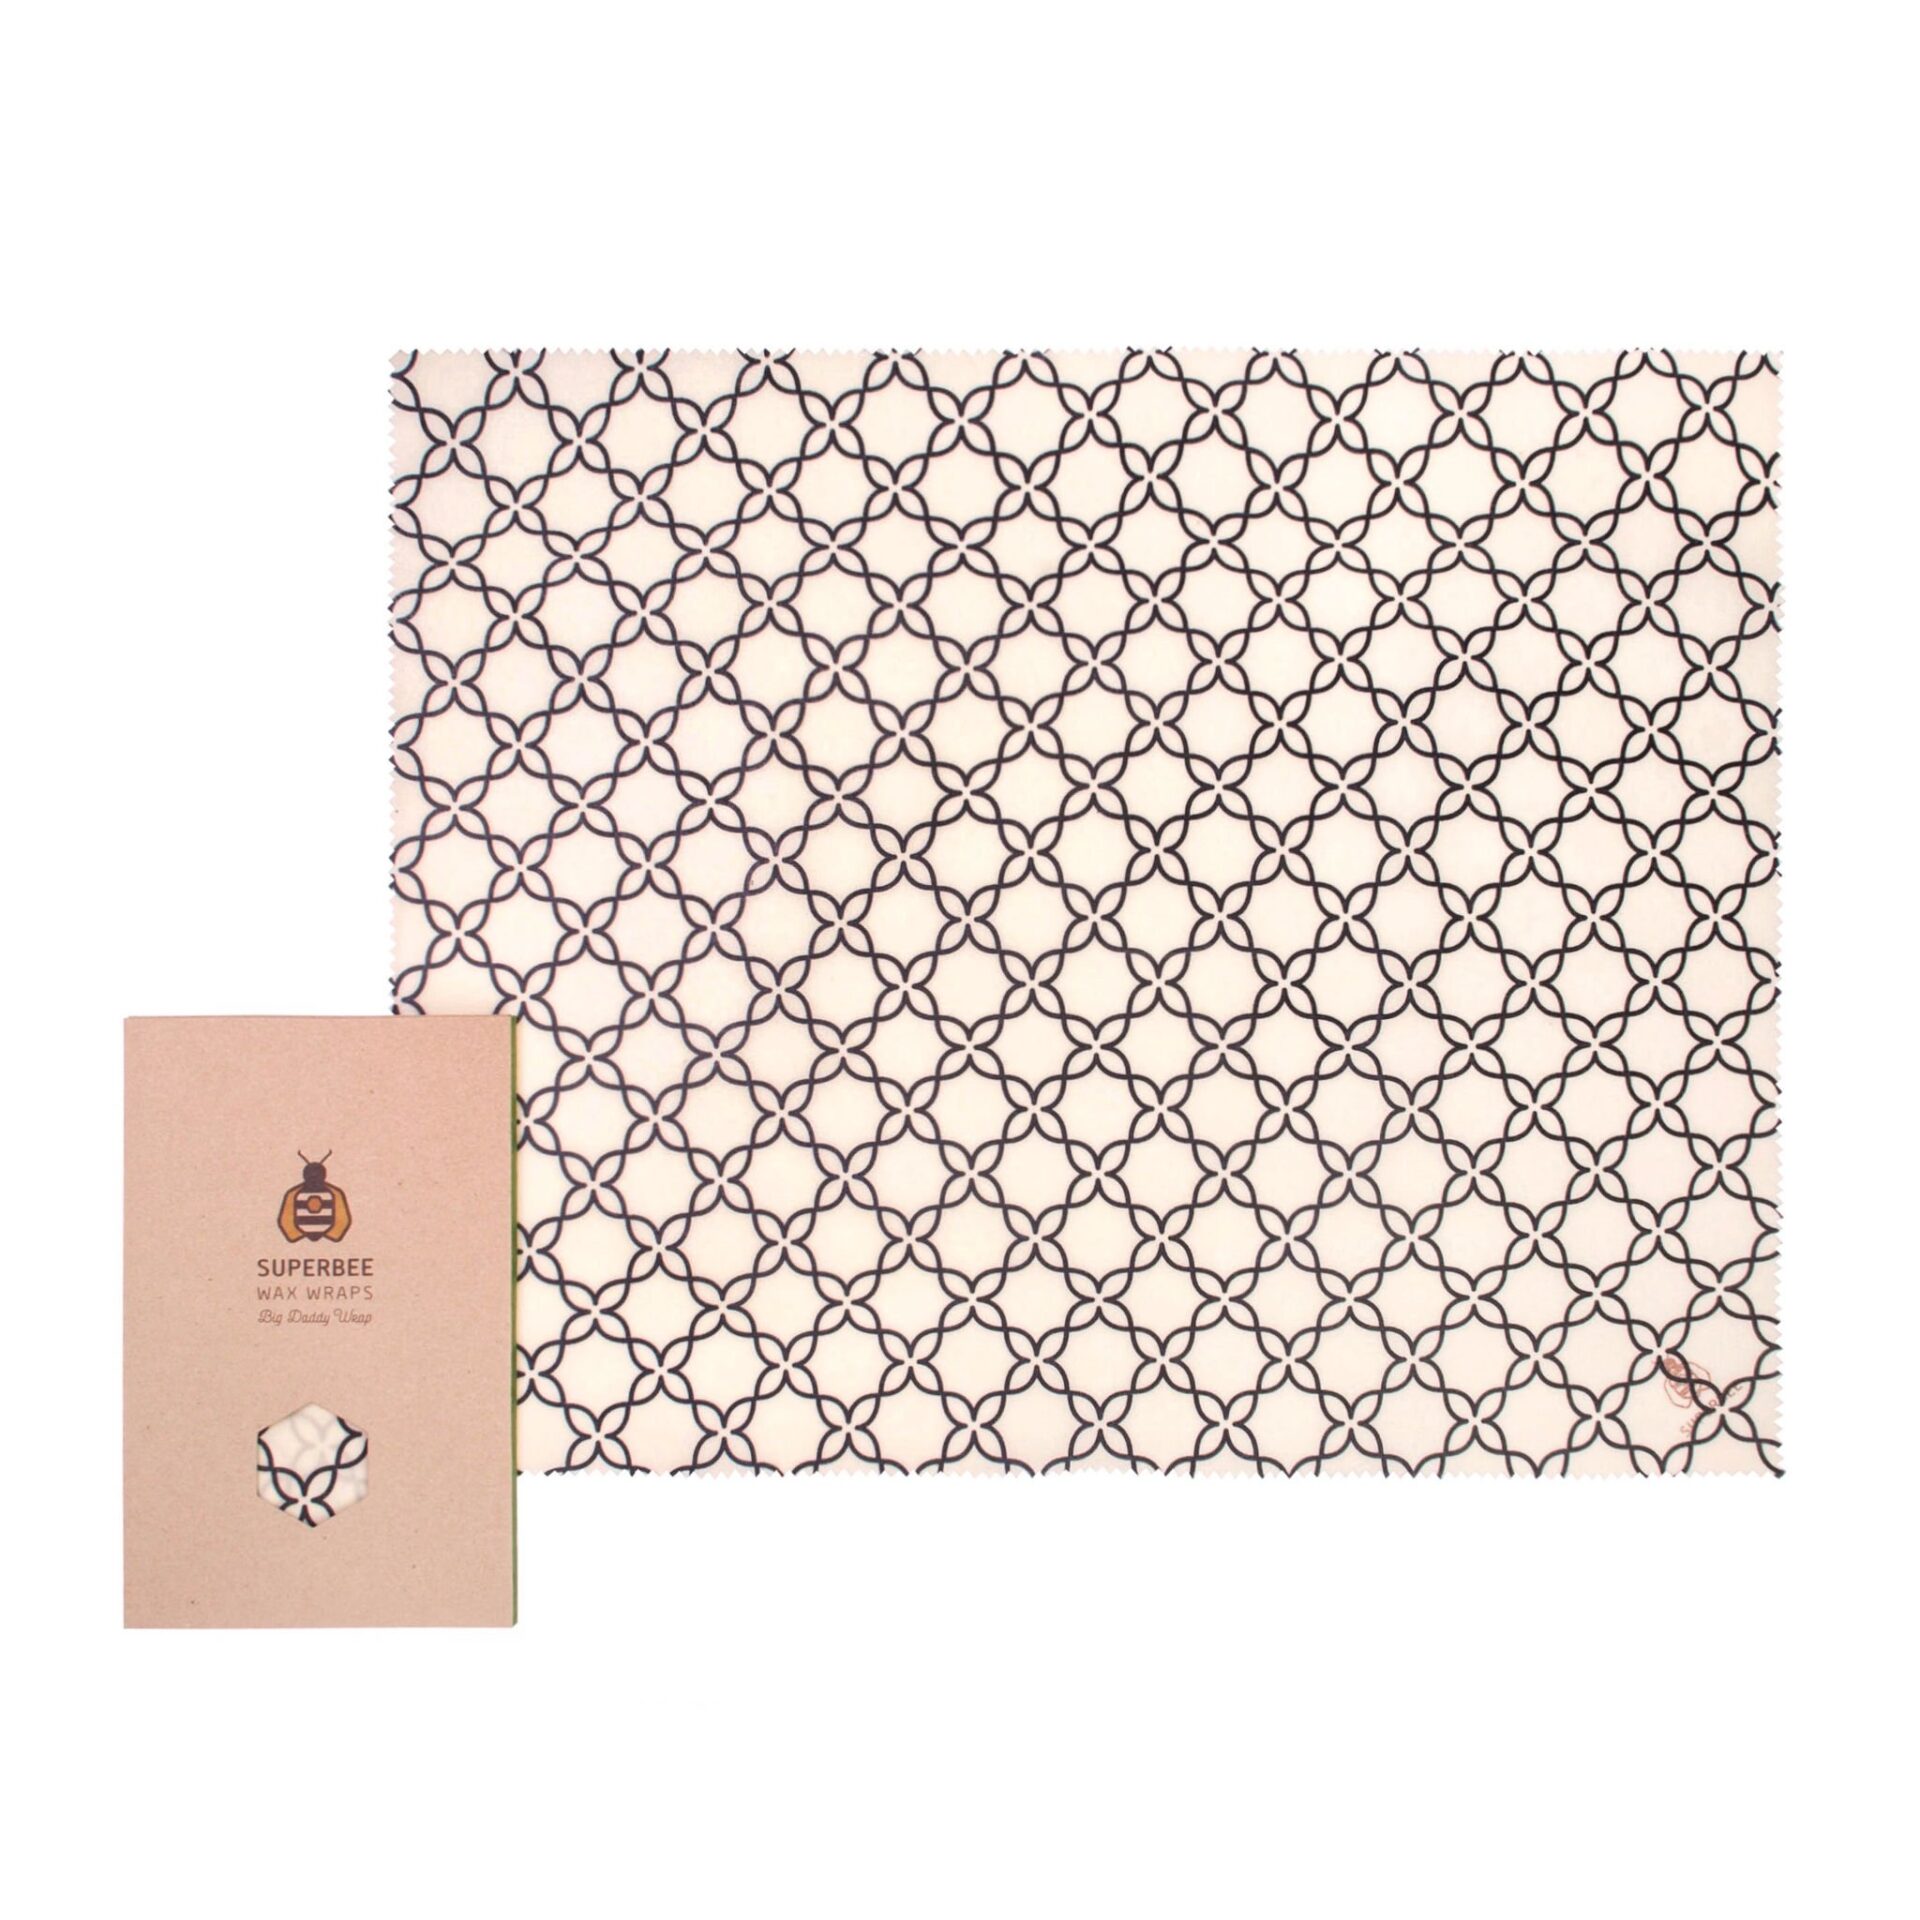 Beeswax Wrap XXL in Meadow Design